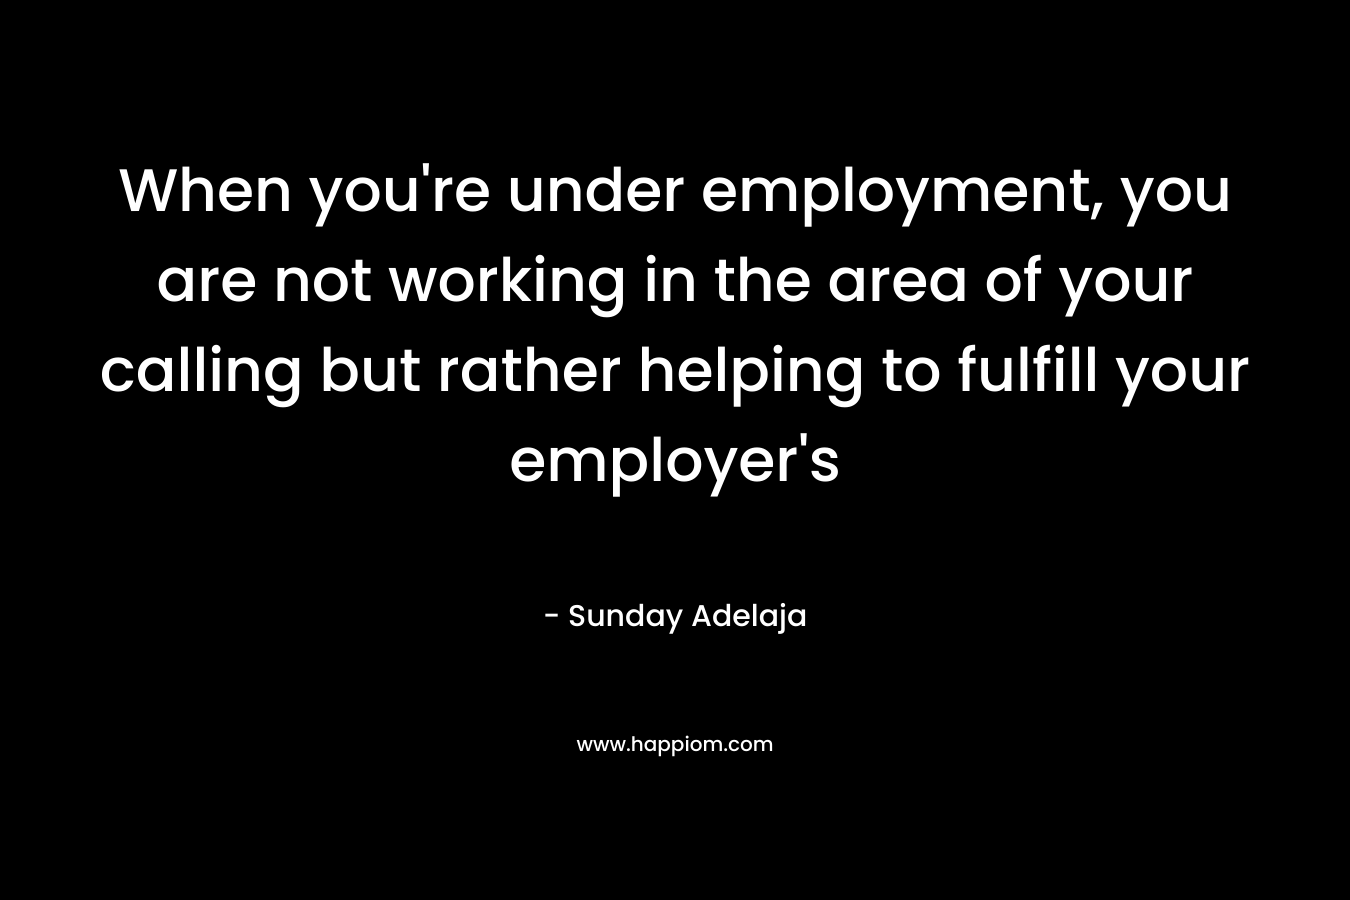 When you’re under employment, you are not working in the area of your calling but rather helping to fulfill your employer’s – Sunday Adelaja